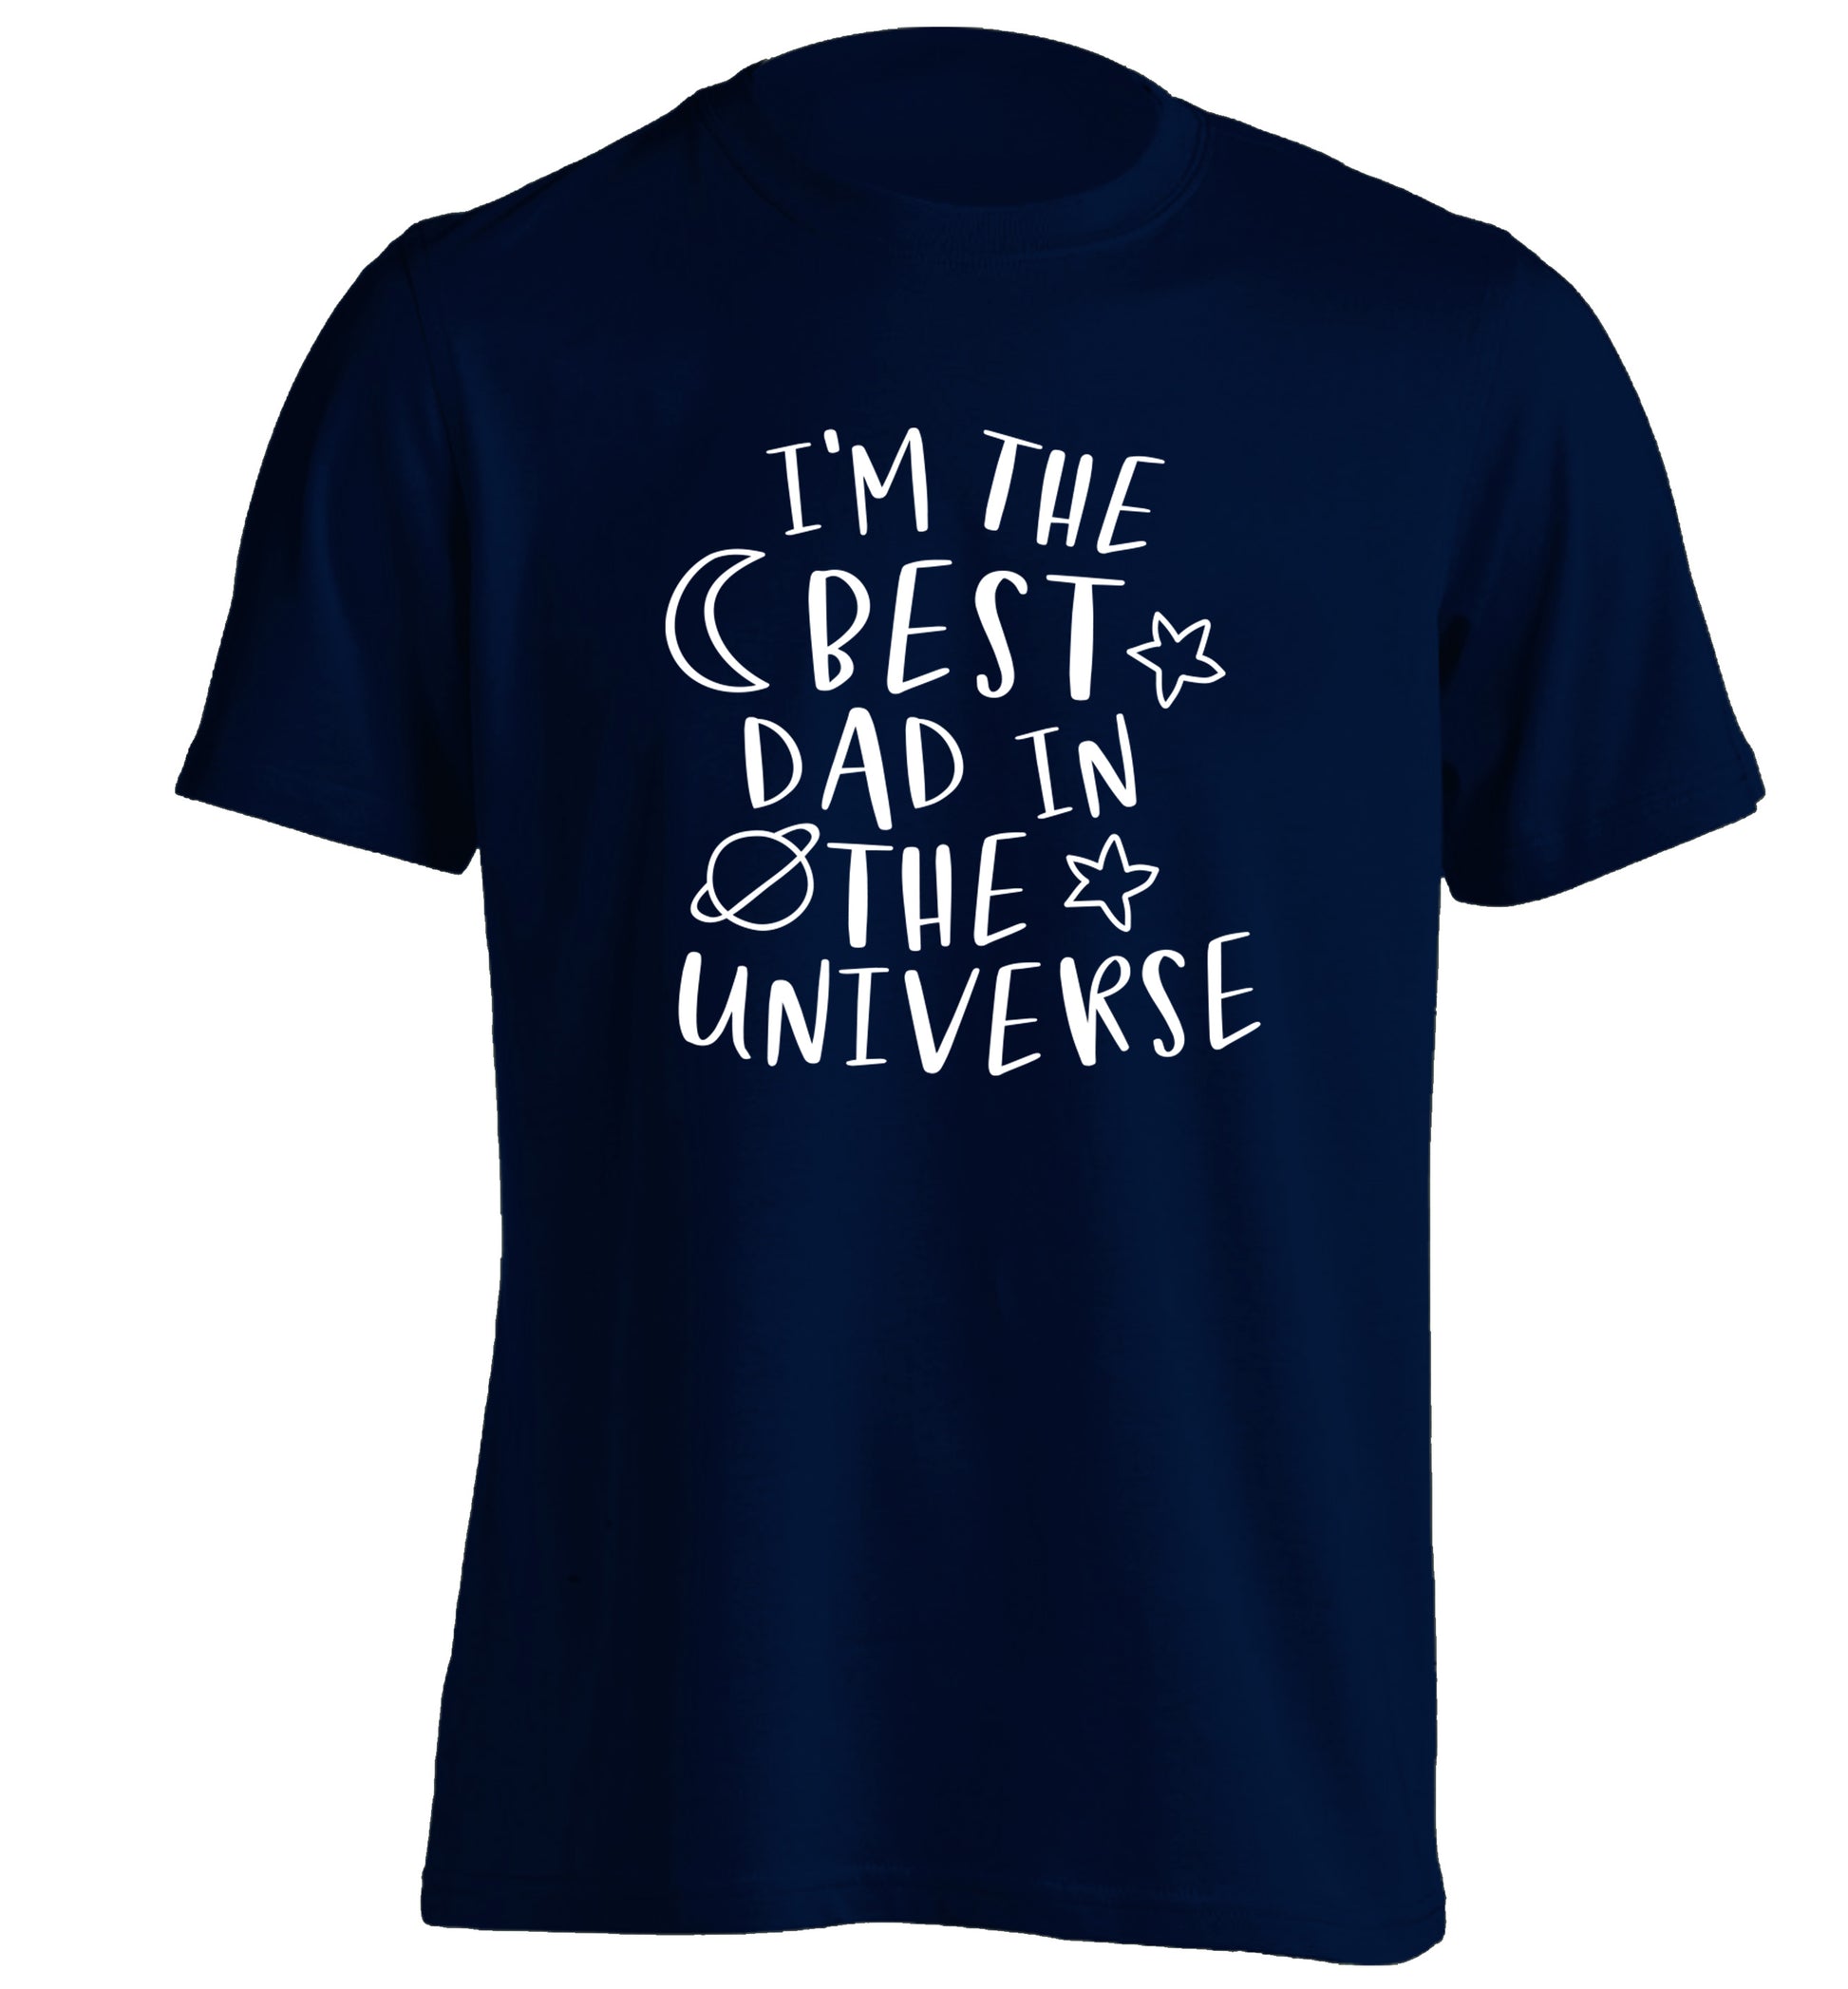 I'm the best dad in the universe adults unisex navy Tshirt 2XL